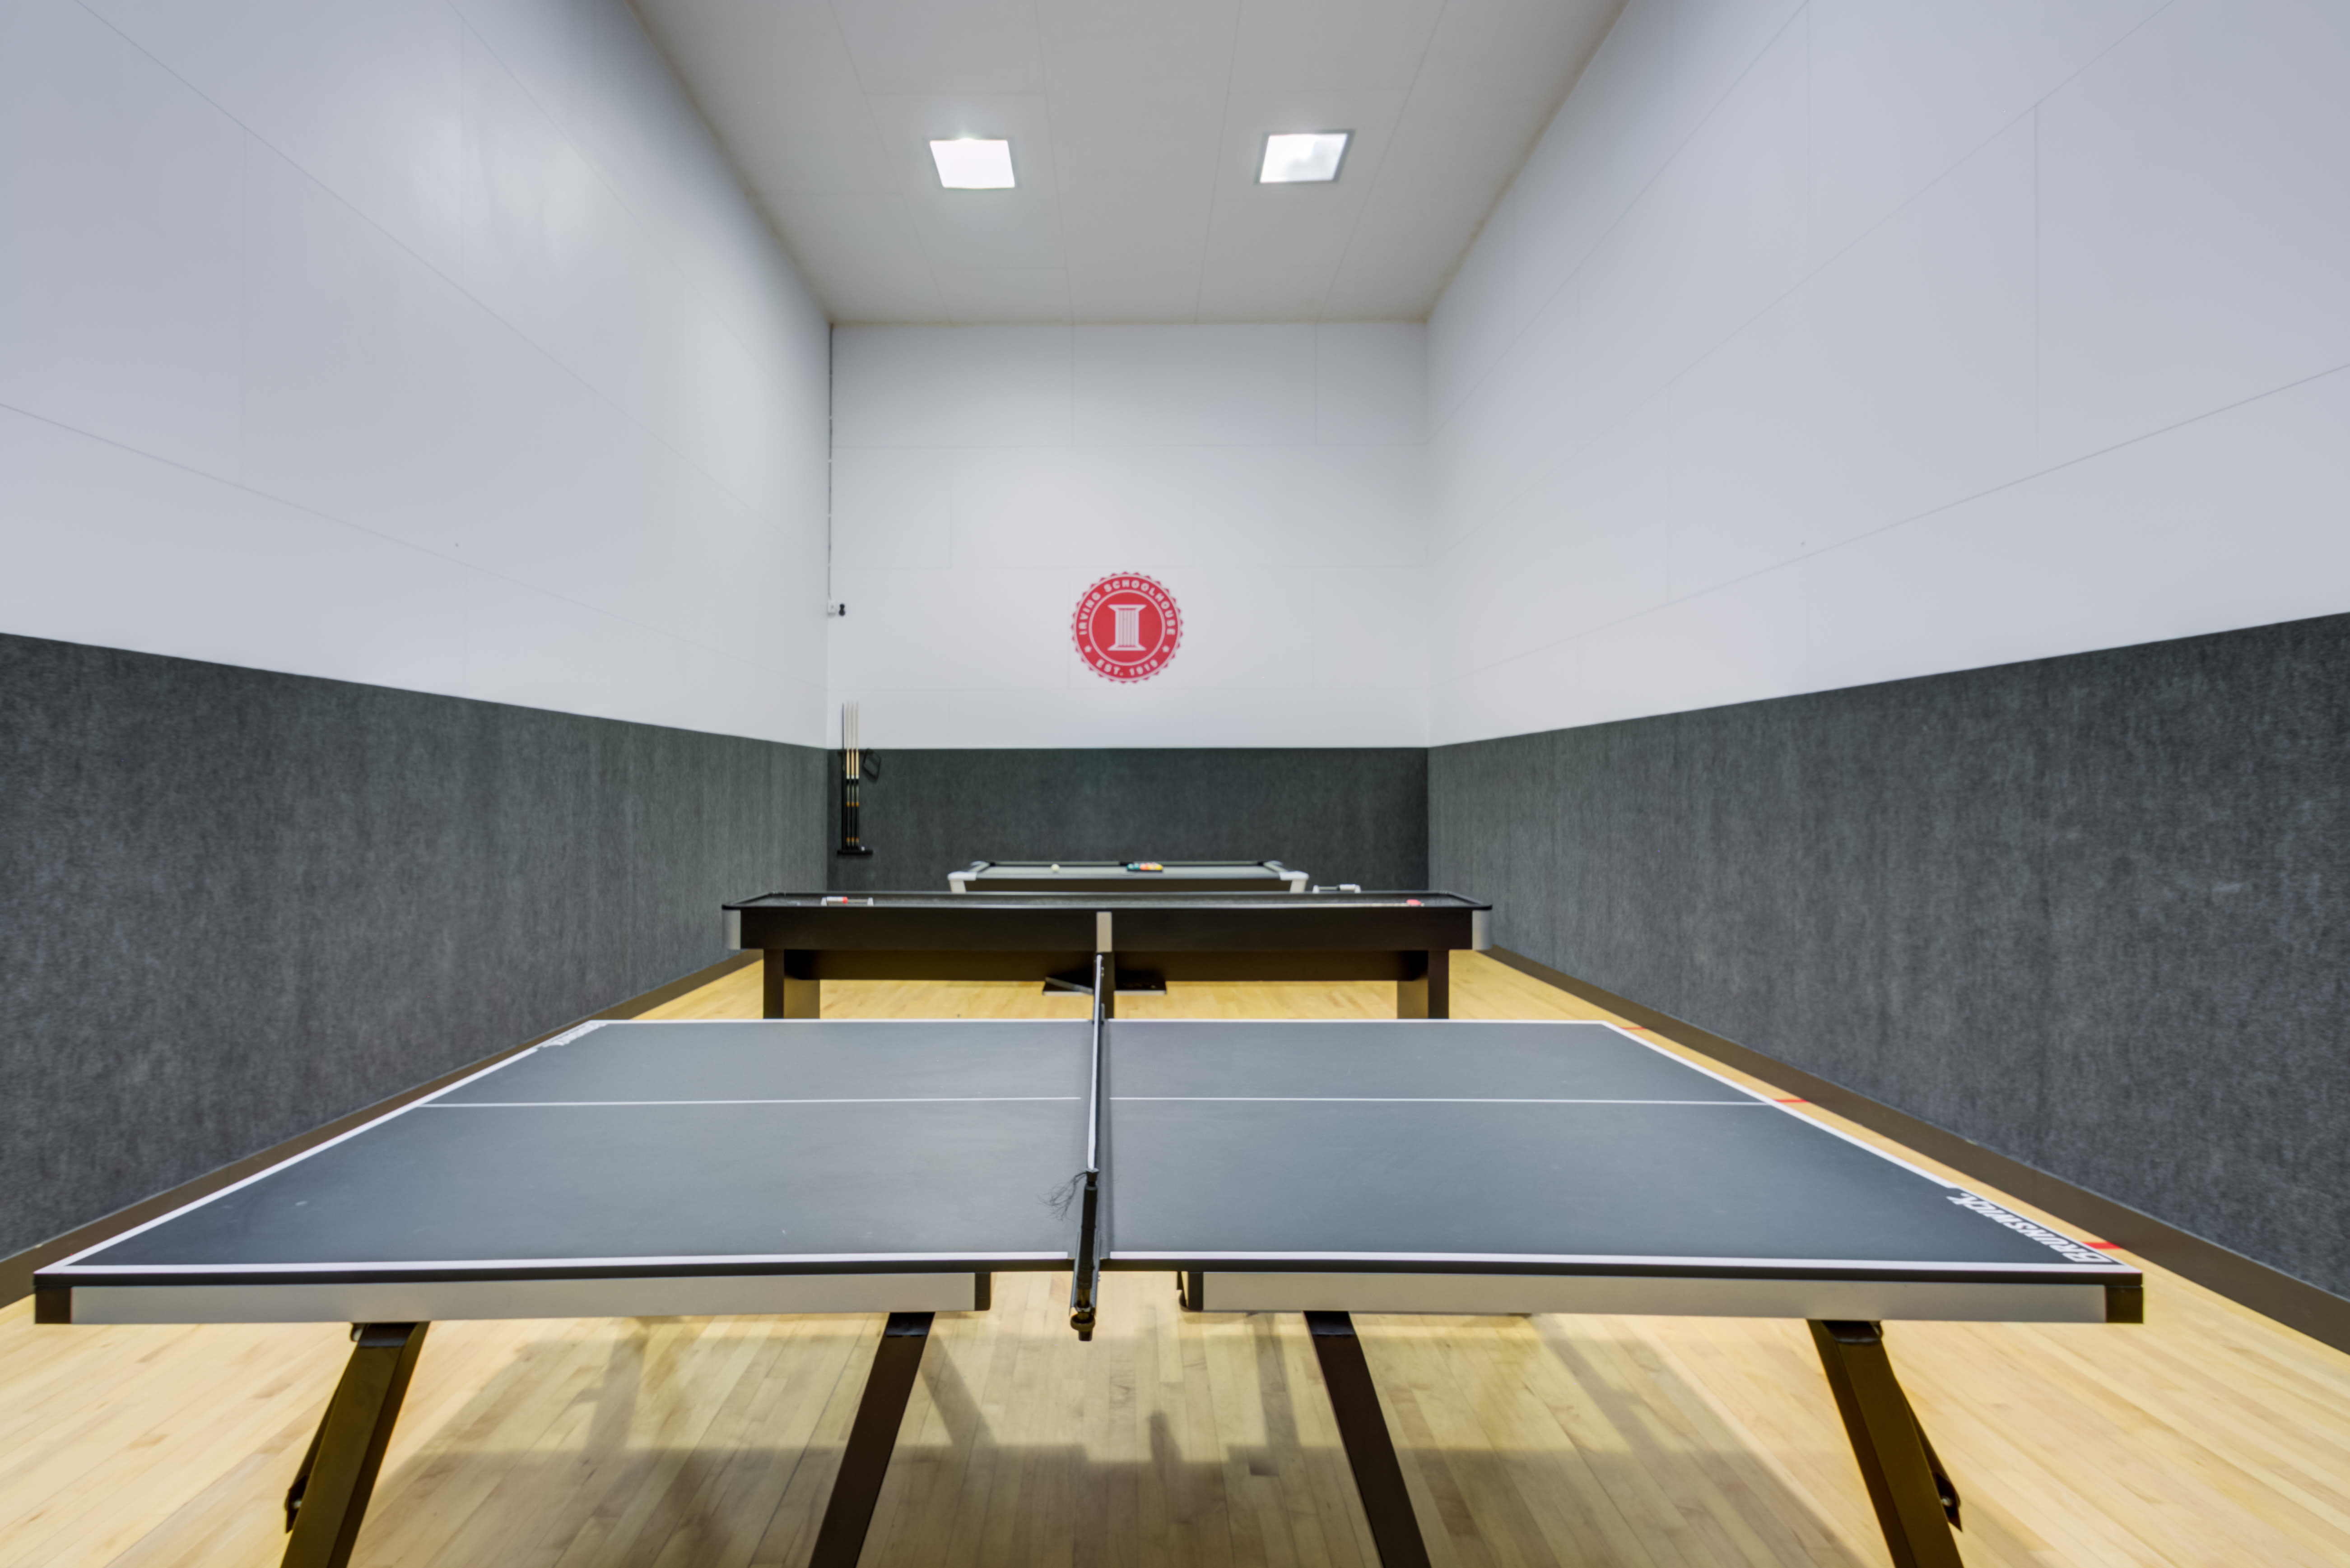 Ping-pong tables at Irving Schoolhouse Apartments in Salt Lake City, Utah